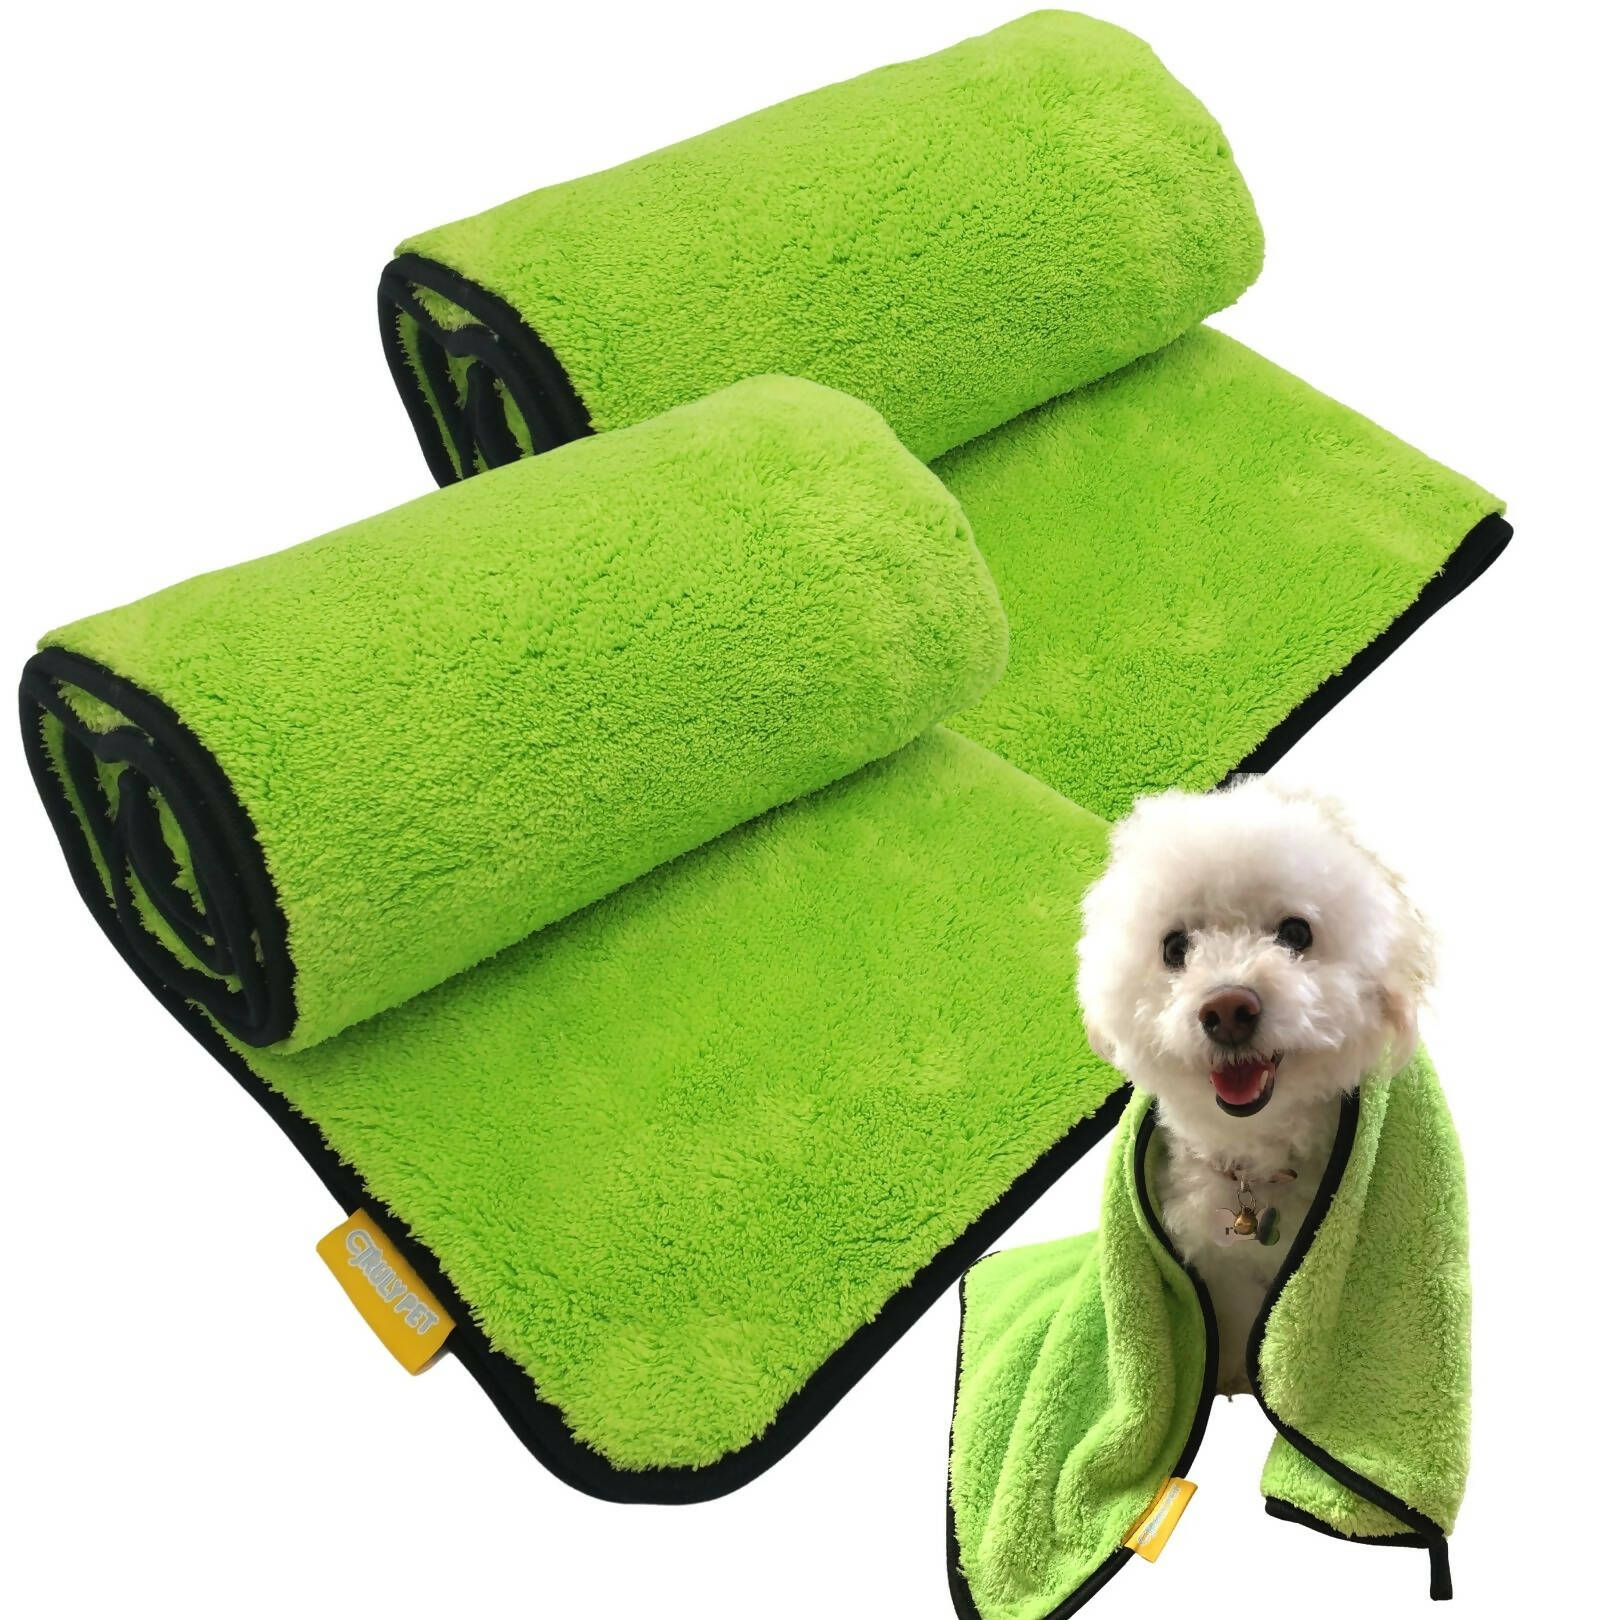 E-Cloth Pet Cleaning & Drying Towel - Super-Absorbent Microfiber Towel for Pets, Animals, Dogs, Cats - Large